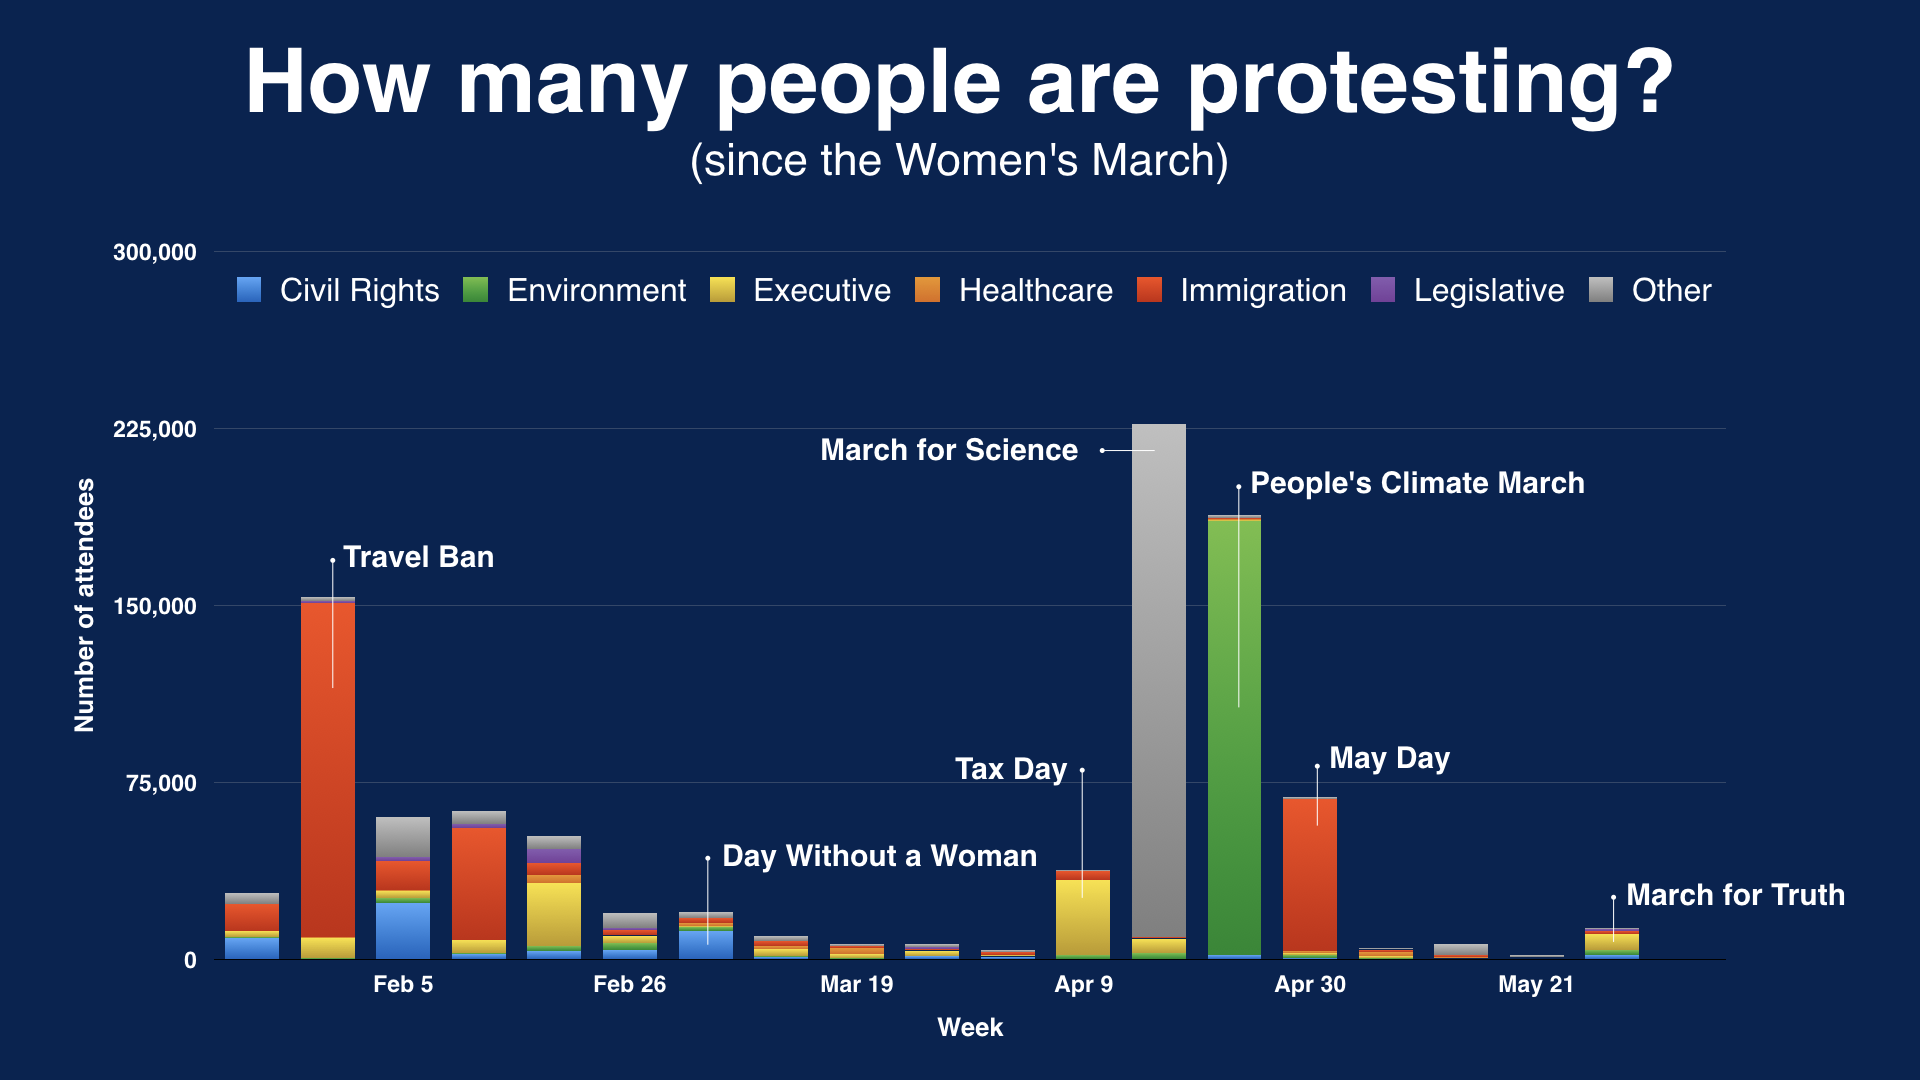 Number of protesters per week since the Women's March.